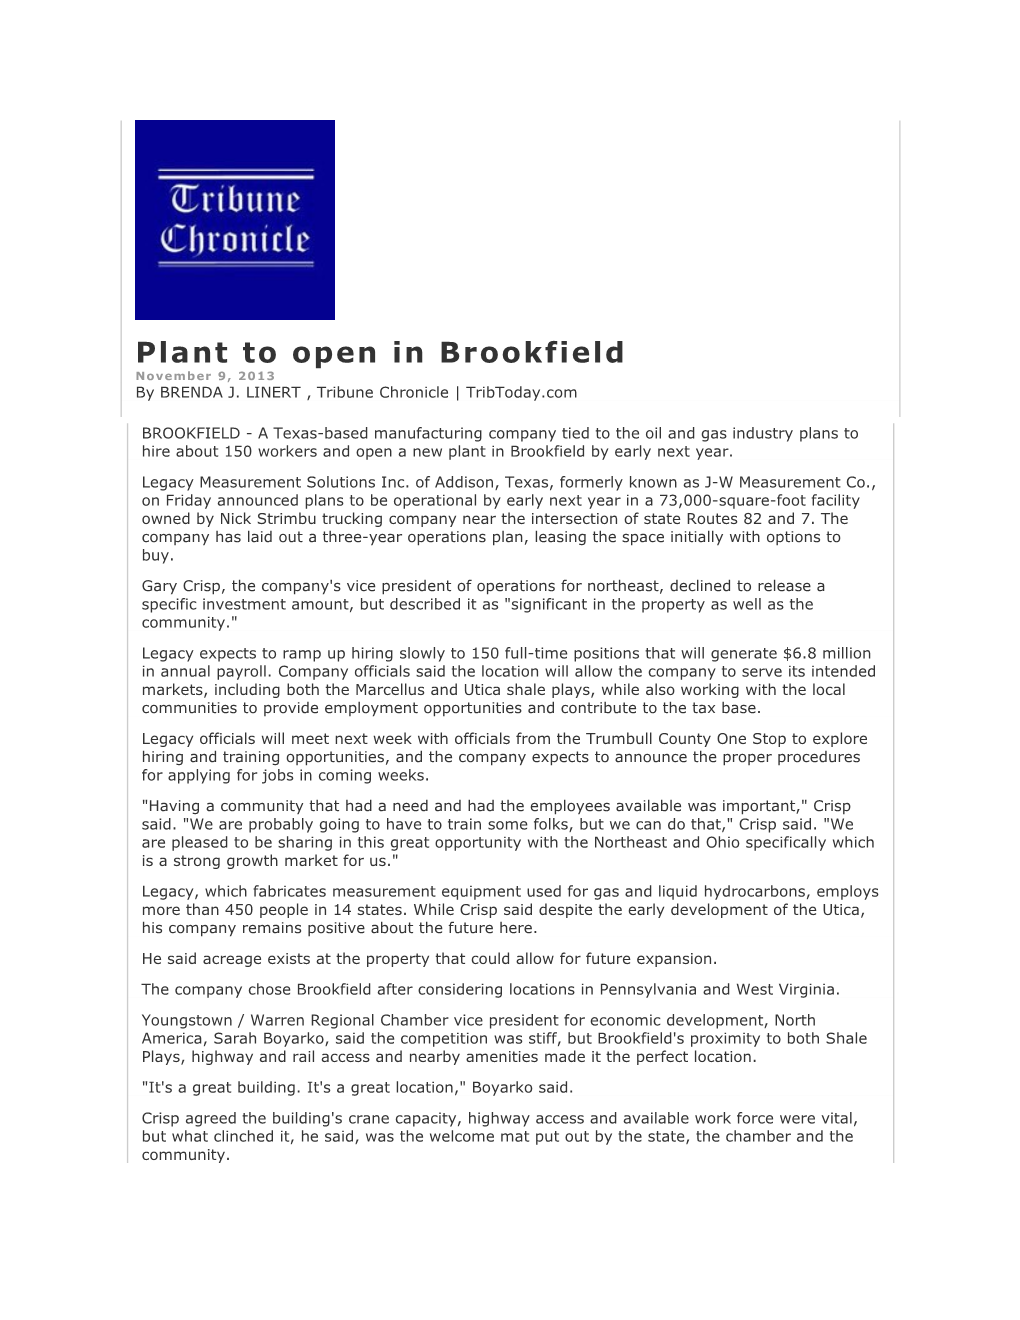 Plant to Open in Brookfield